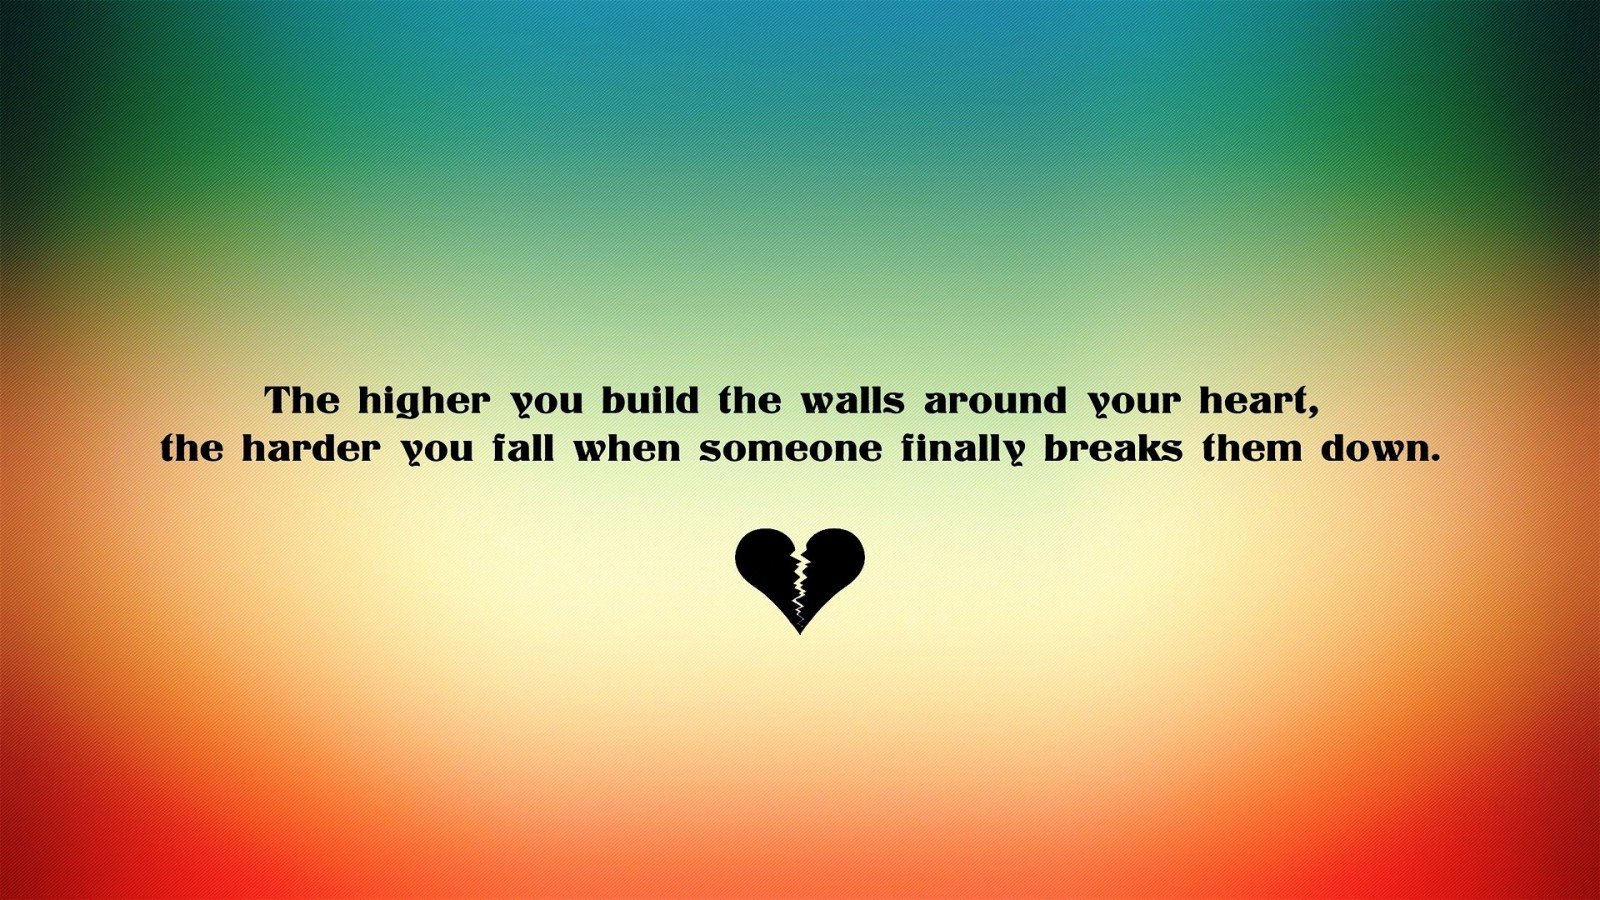 Broken Heart Quotes And Sayings For Him. QuotesGram